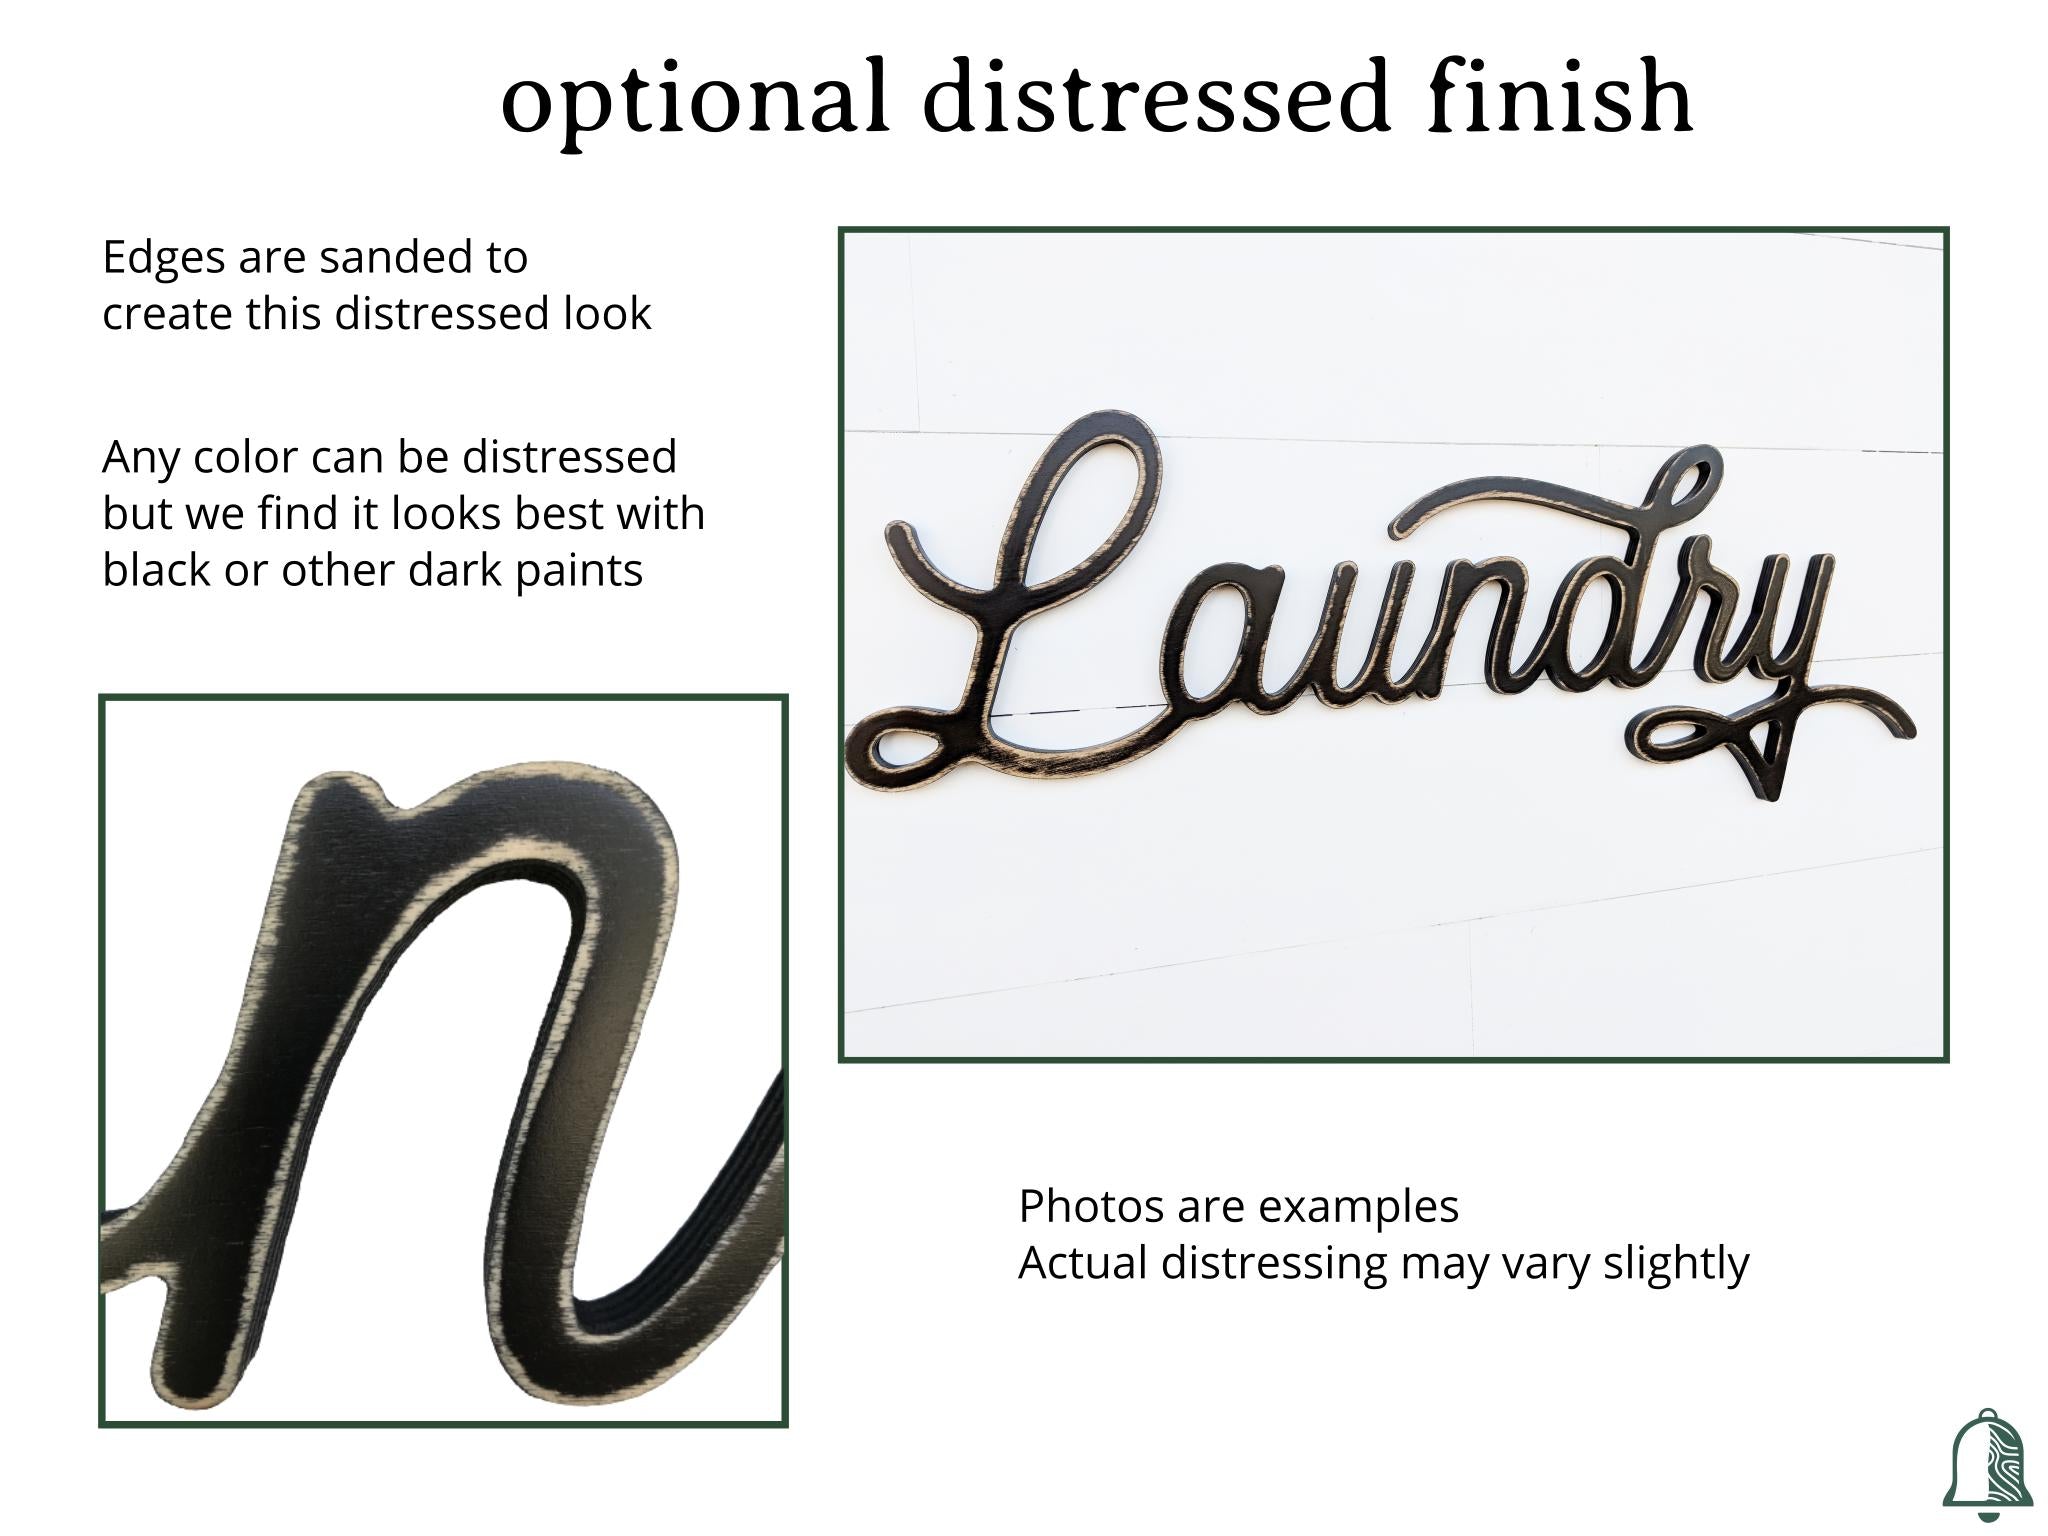 Description of the option to add a distressed finish to your product